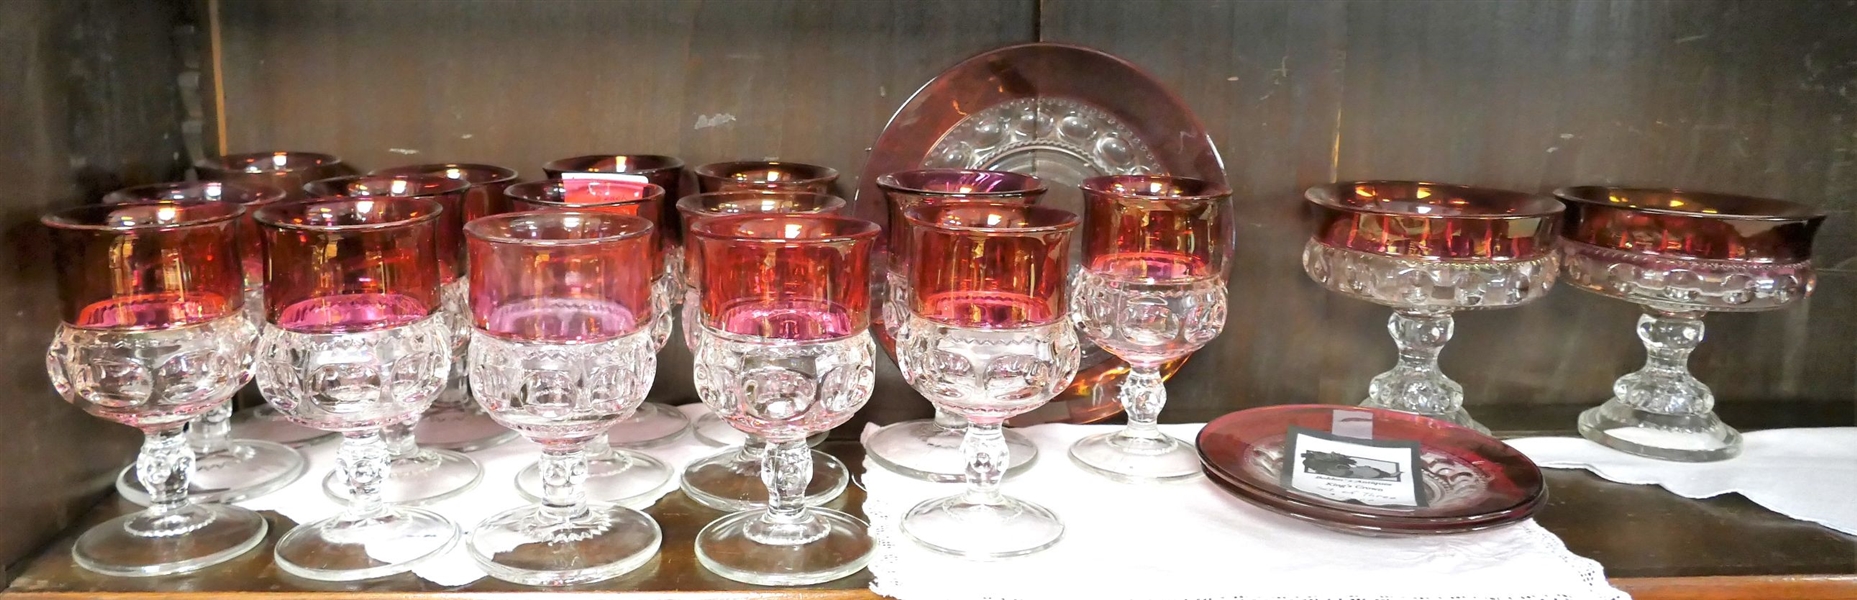 20 Pieces of Kings Crown - Including 5 1/2" Goblets, 2 - 6" Saucers, 2 Compotes 5" Across